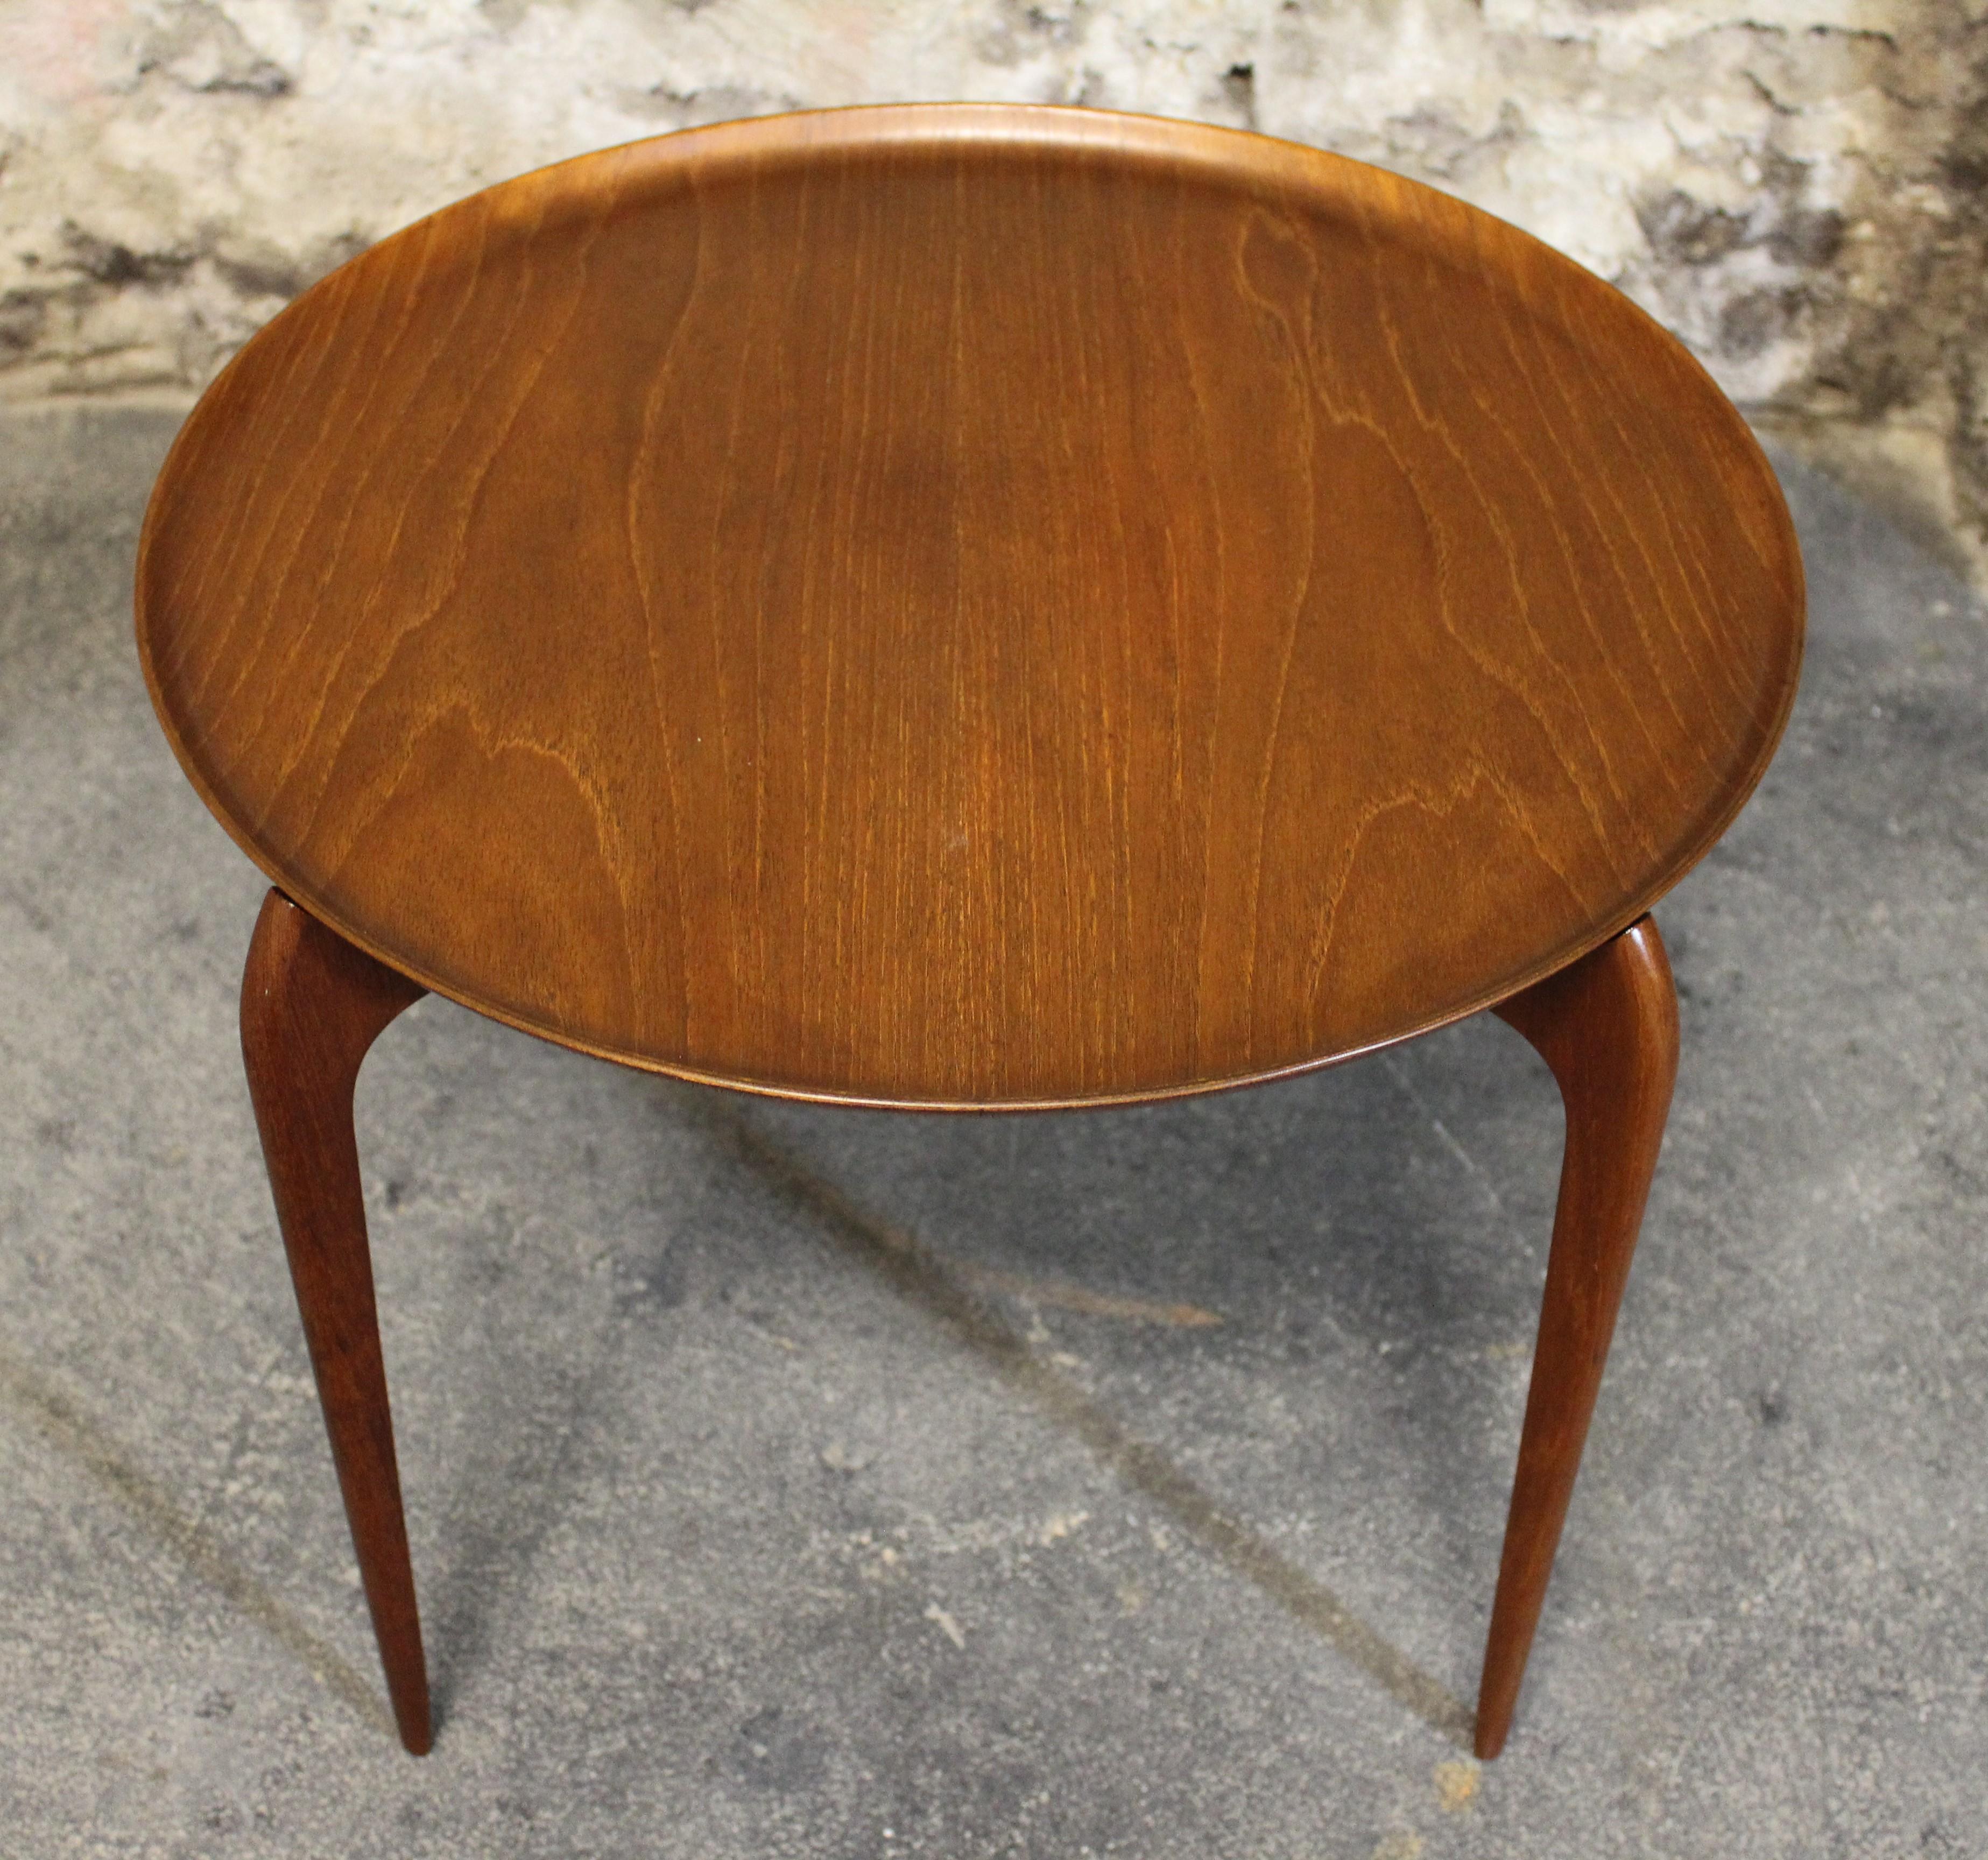 Scandinavian Modern Willumsen & Engholm Danish Teak Side Table with Removable Tray Top